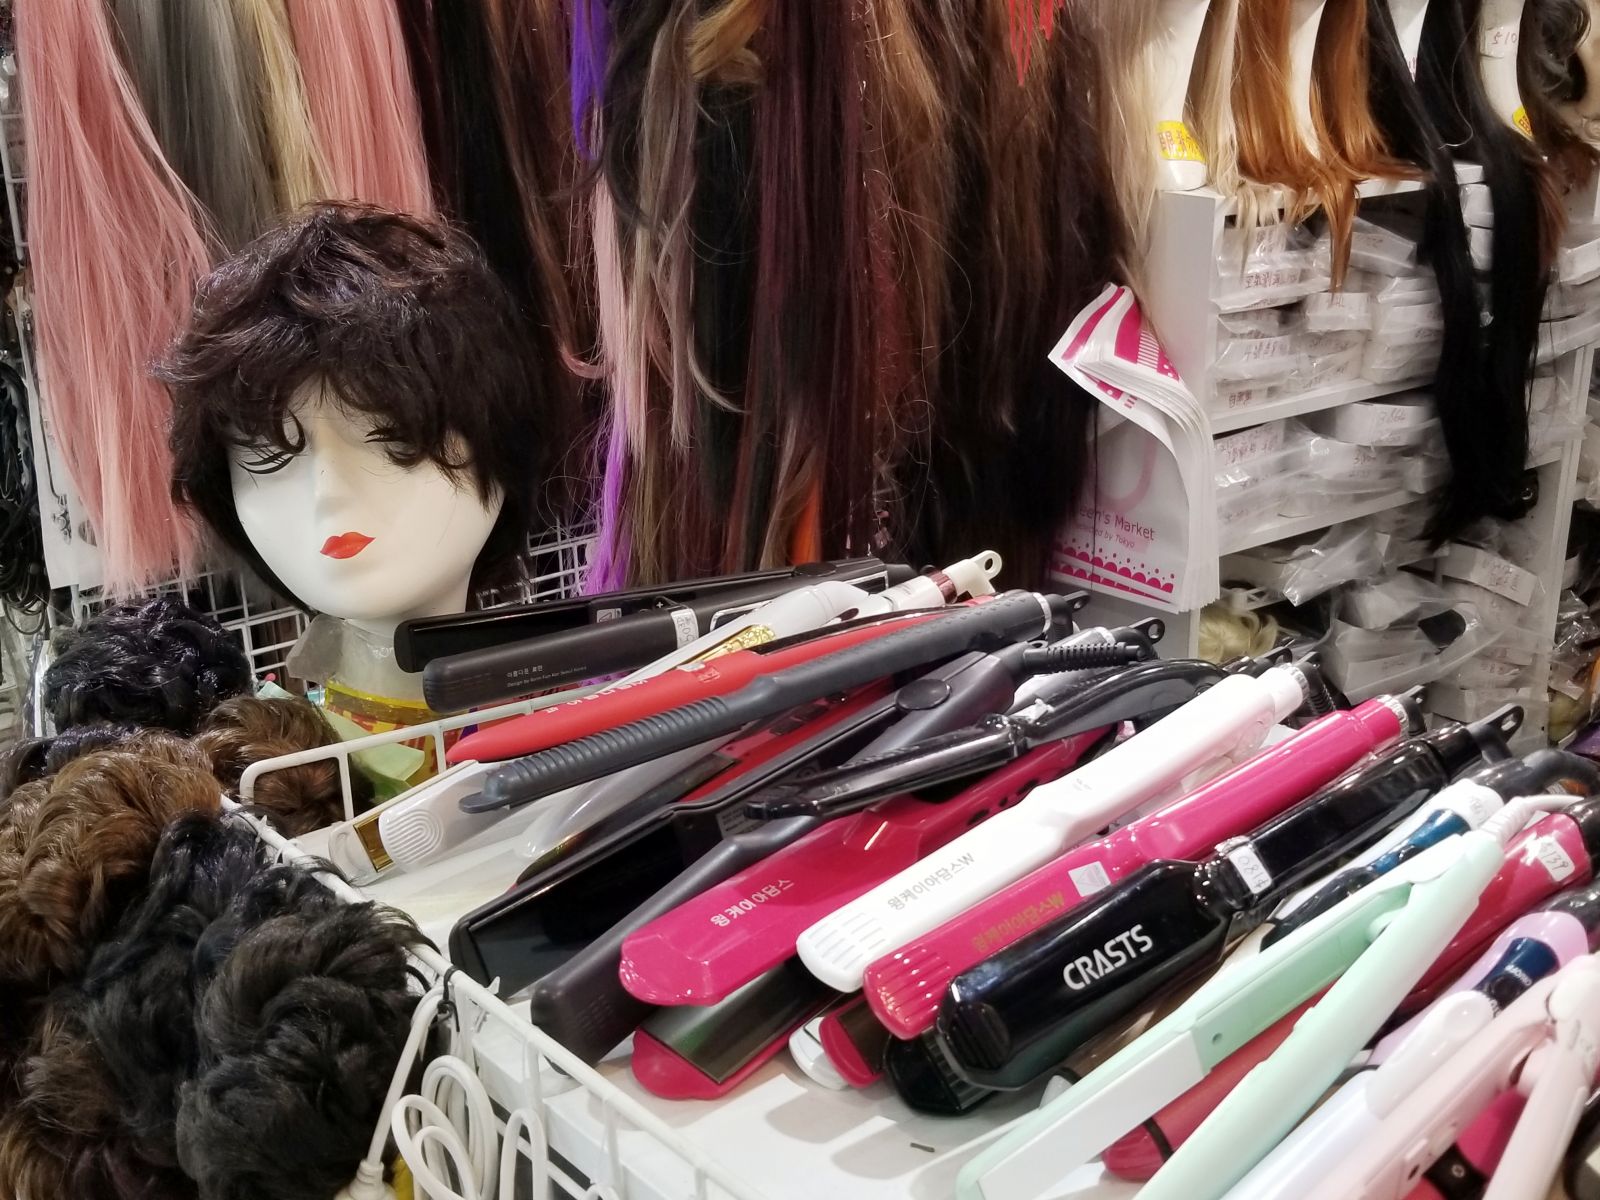 Besides clothes and shoes, there are wigs, beauty products, snacks and other trendy gadgets 